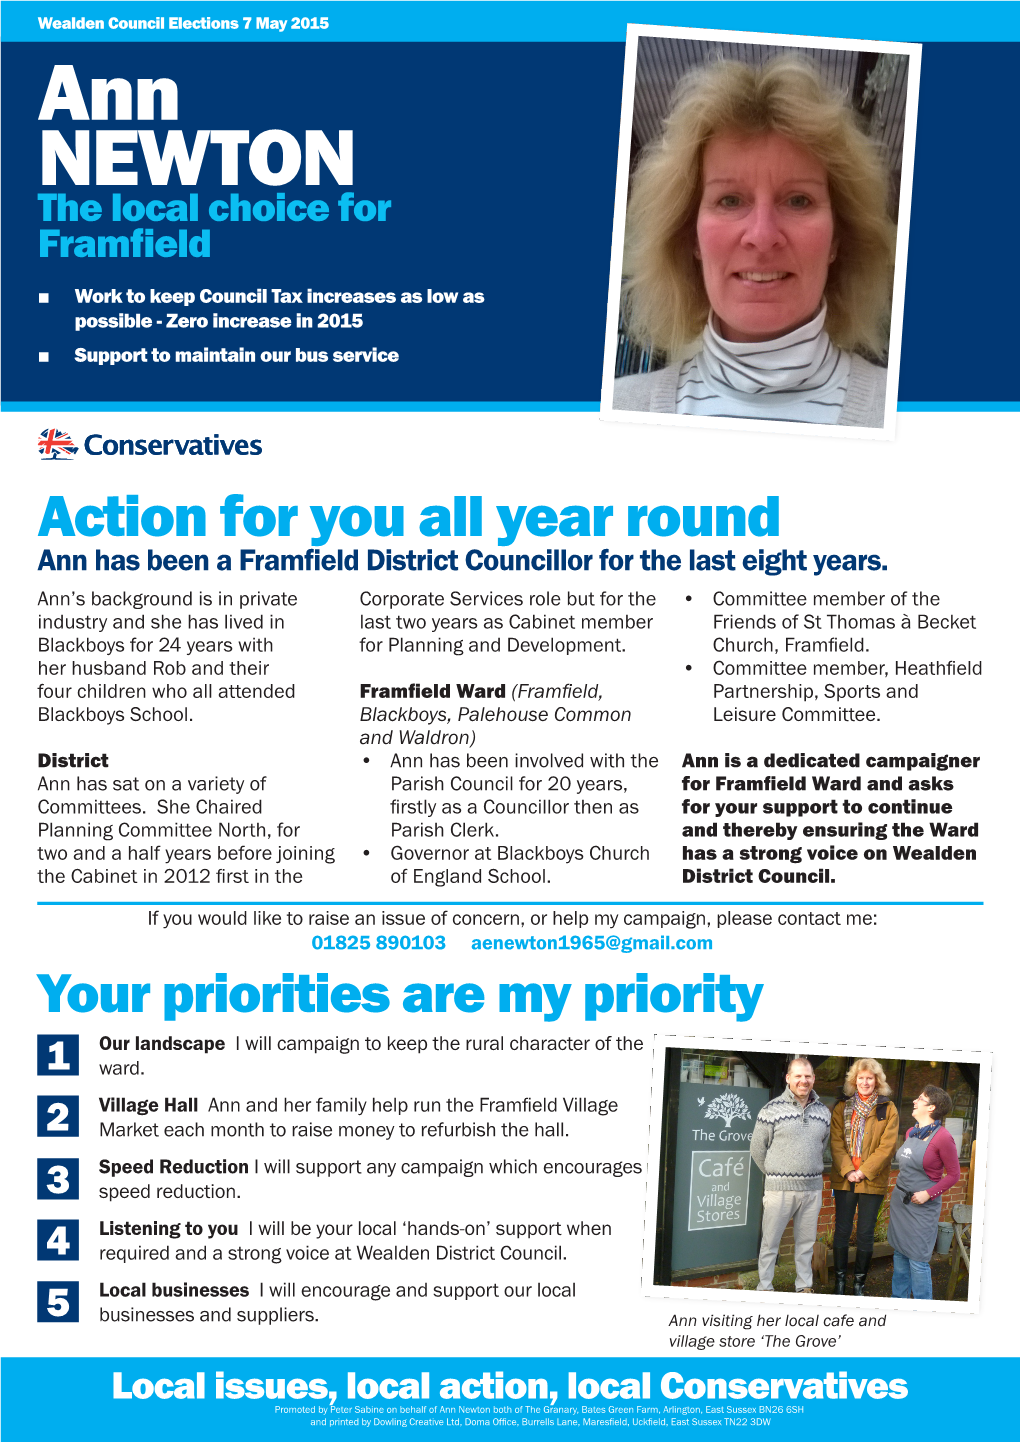 Ann NEWTON the Local Choice for Framfield ■ Work to Keep Council Tax Increases As Low As Possible - Zero Increase in 2015 ■ Support to Maintain Our Bus Service